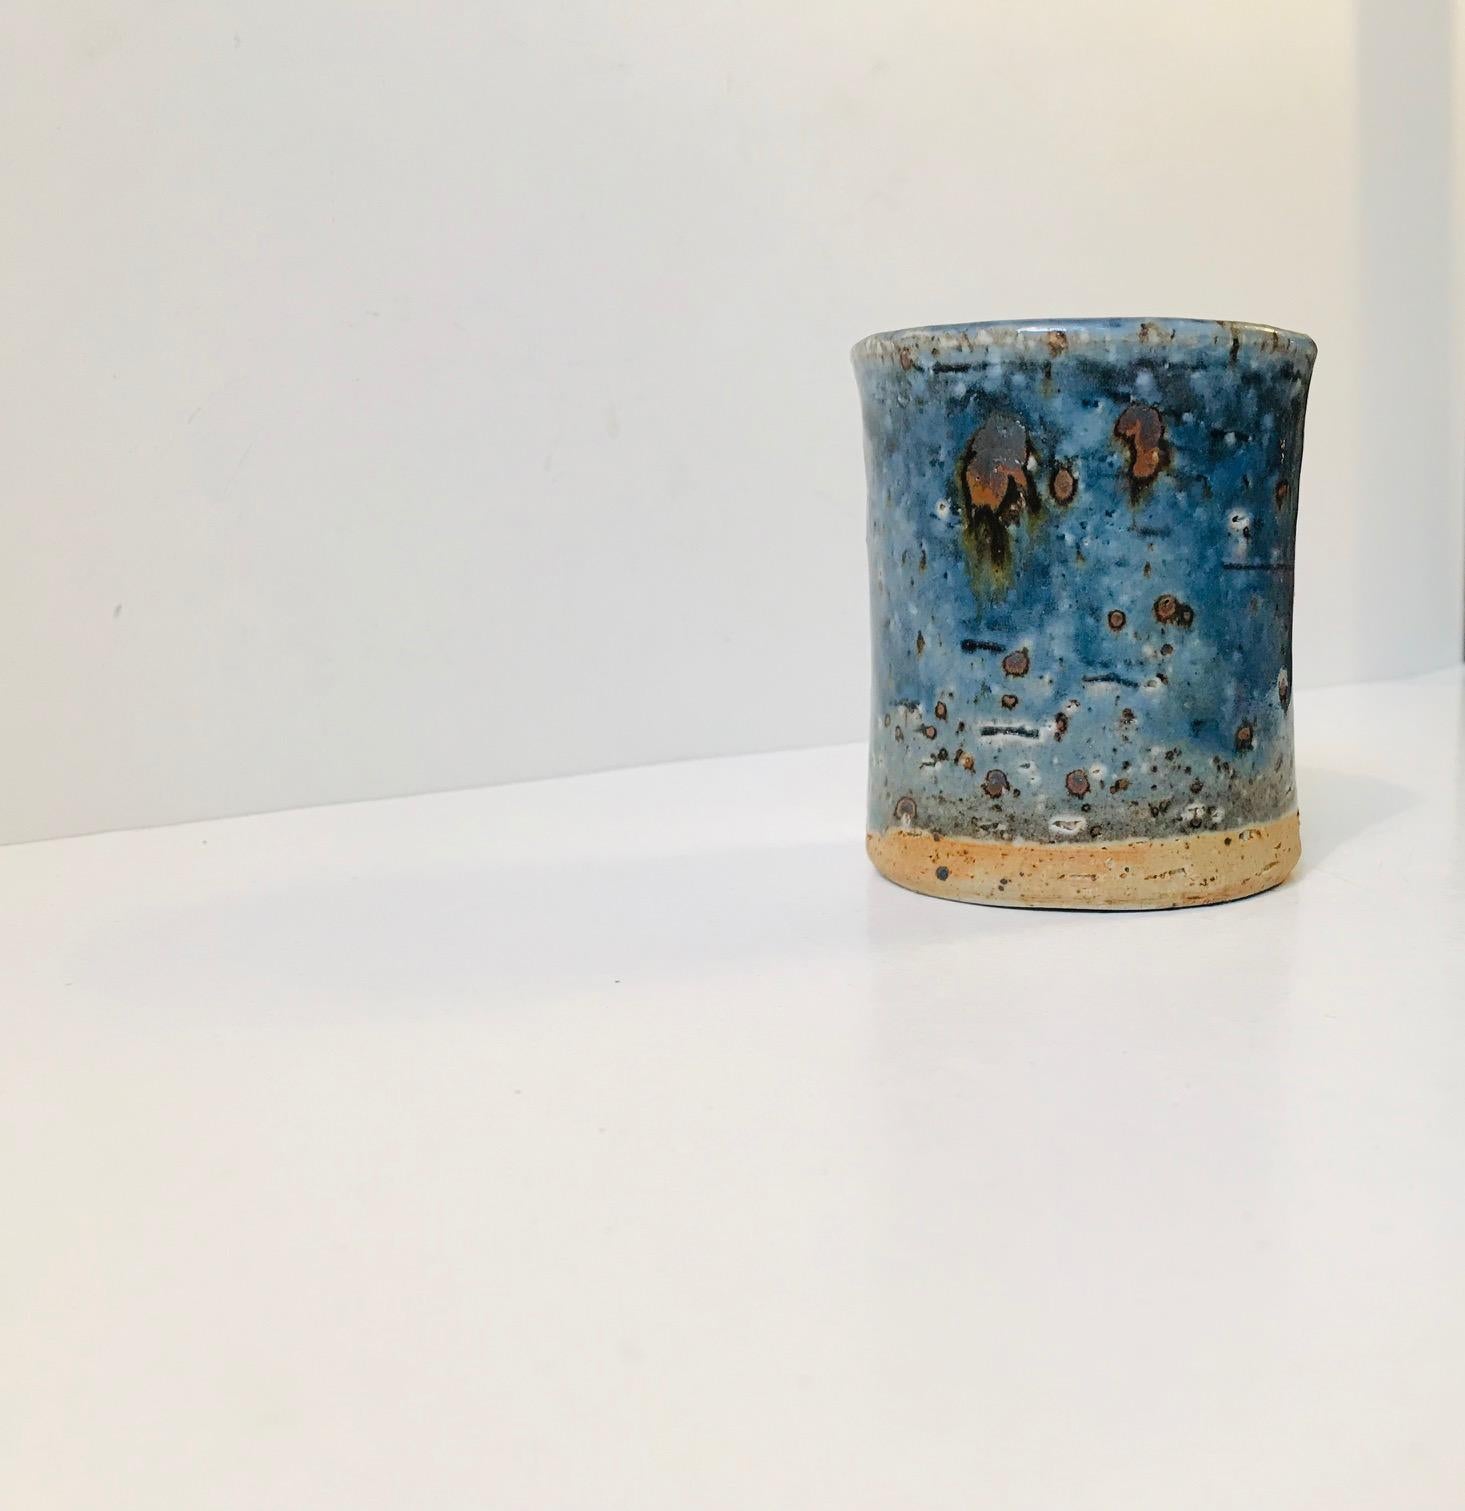 - A limited Atelje studio vase from Rörstrand in Sweden
- Designed by Marianne Westman during the 1960s
- This piece features a thick cylindrical body and blue crystalline glazes
- Signed and marked by hand to the base.